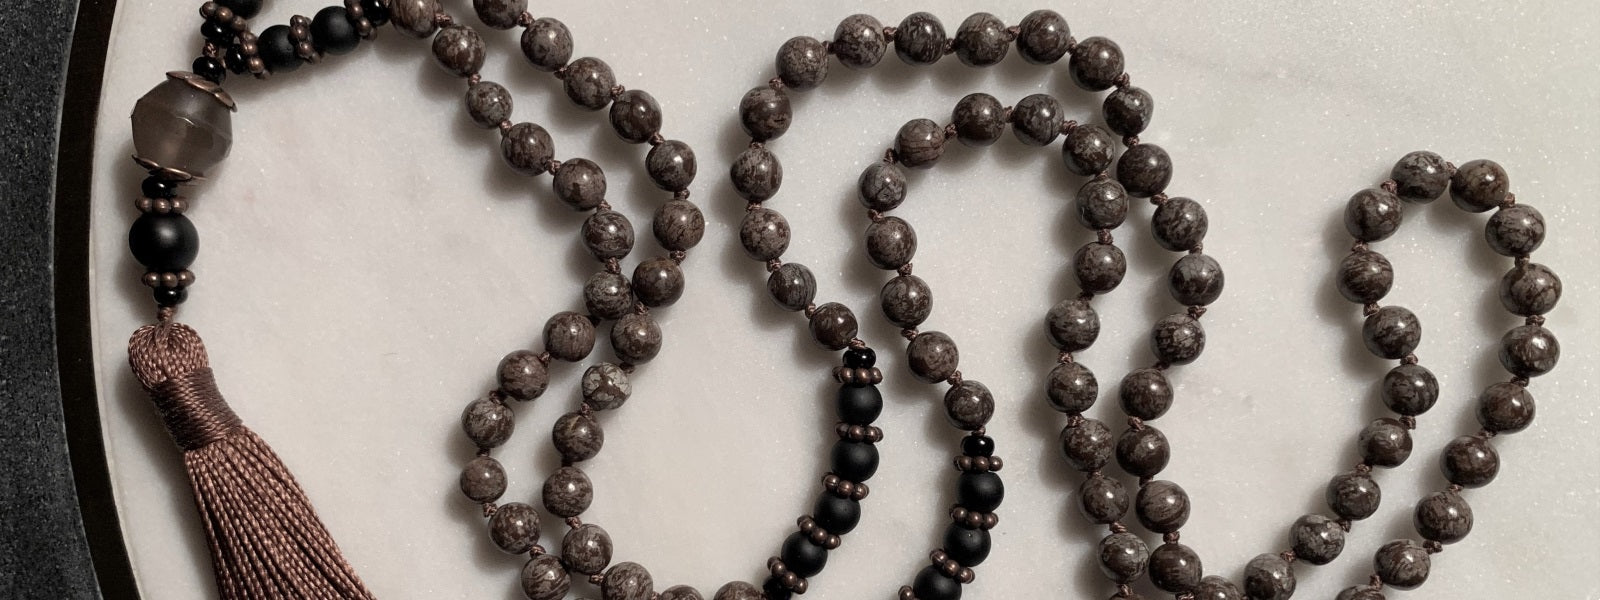 What Type of Mala Beads? Buddhist Mala Material for Mantra